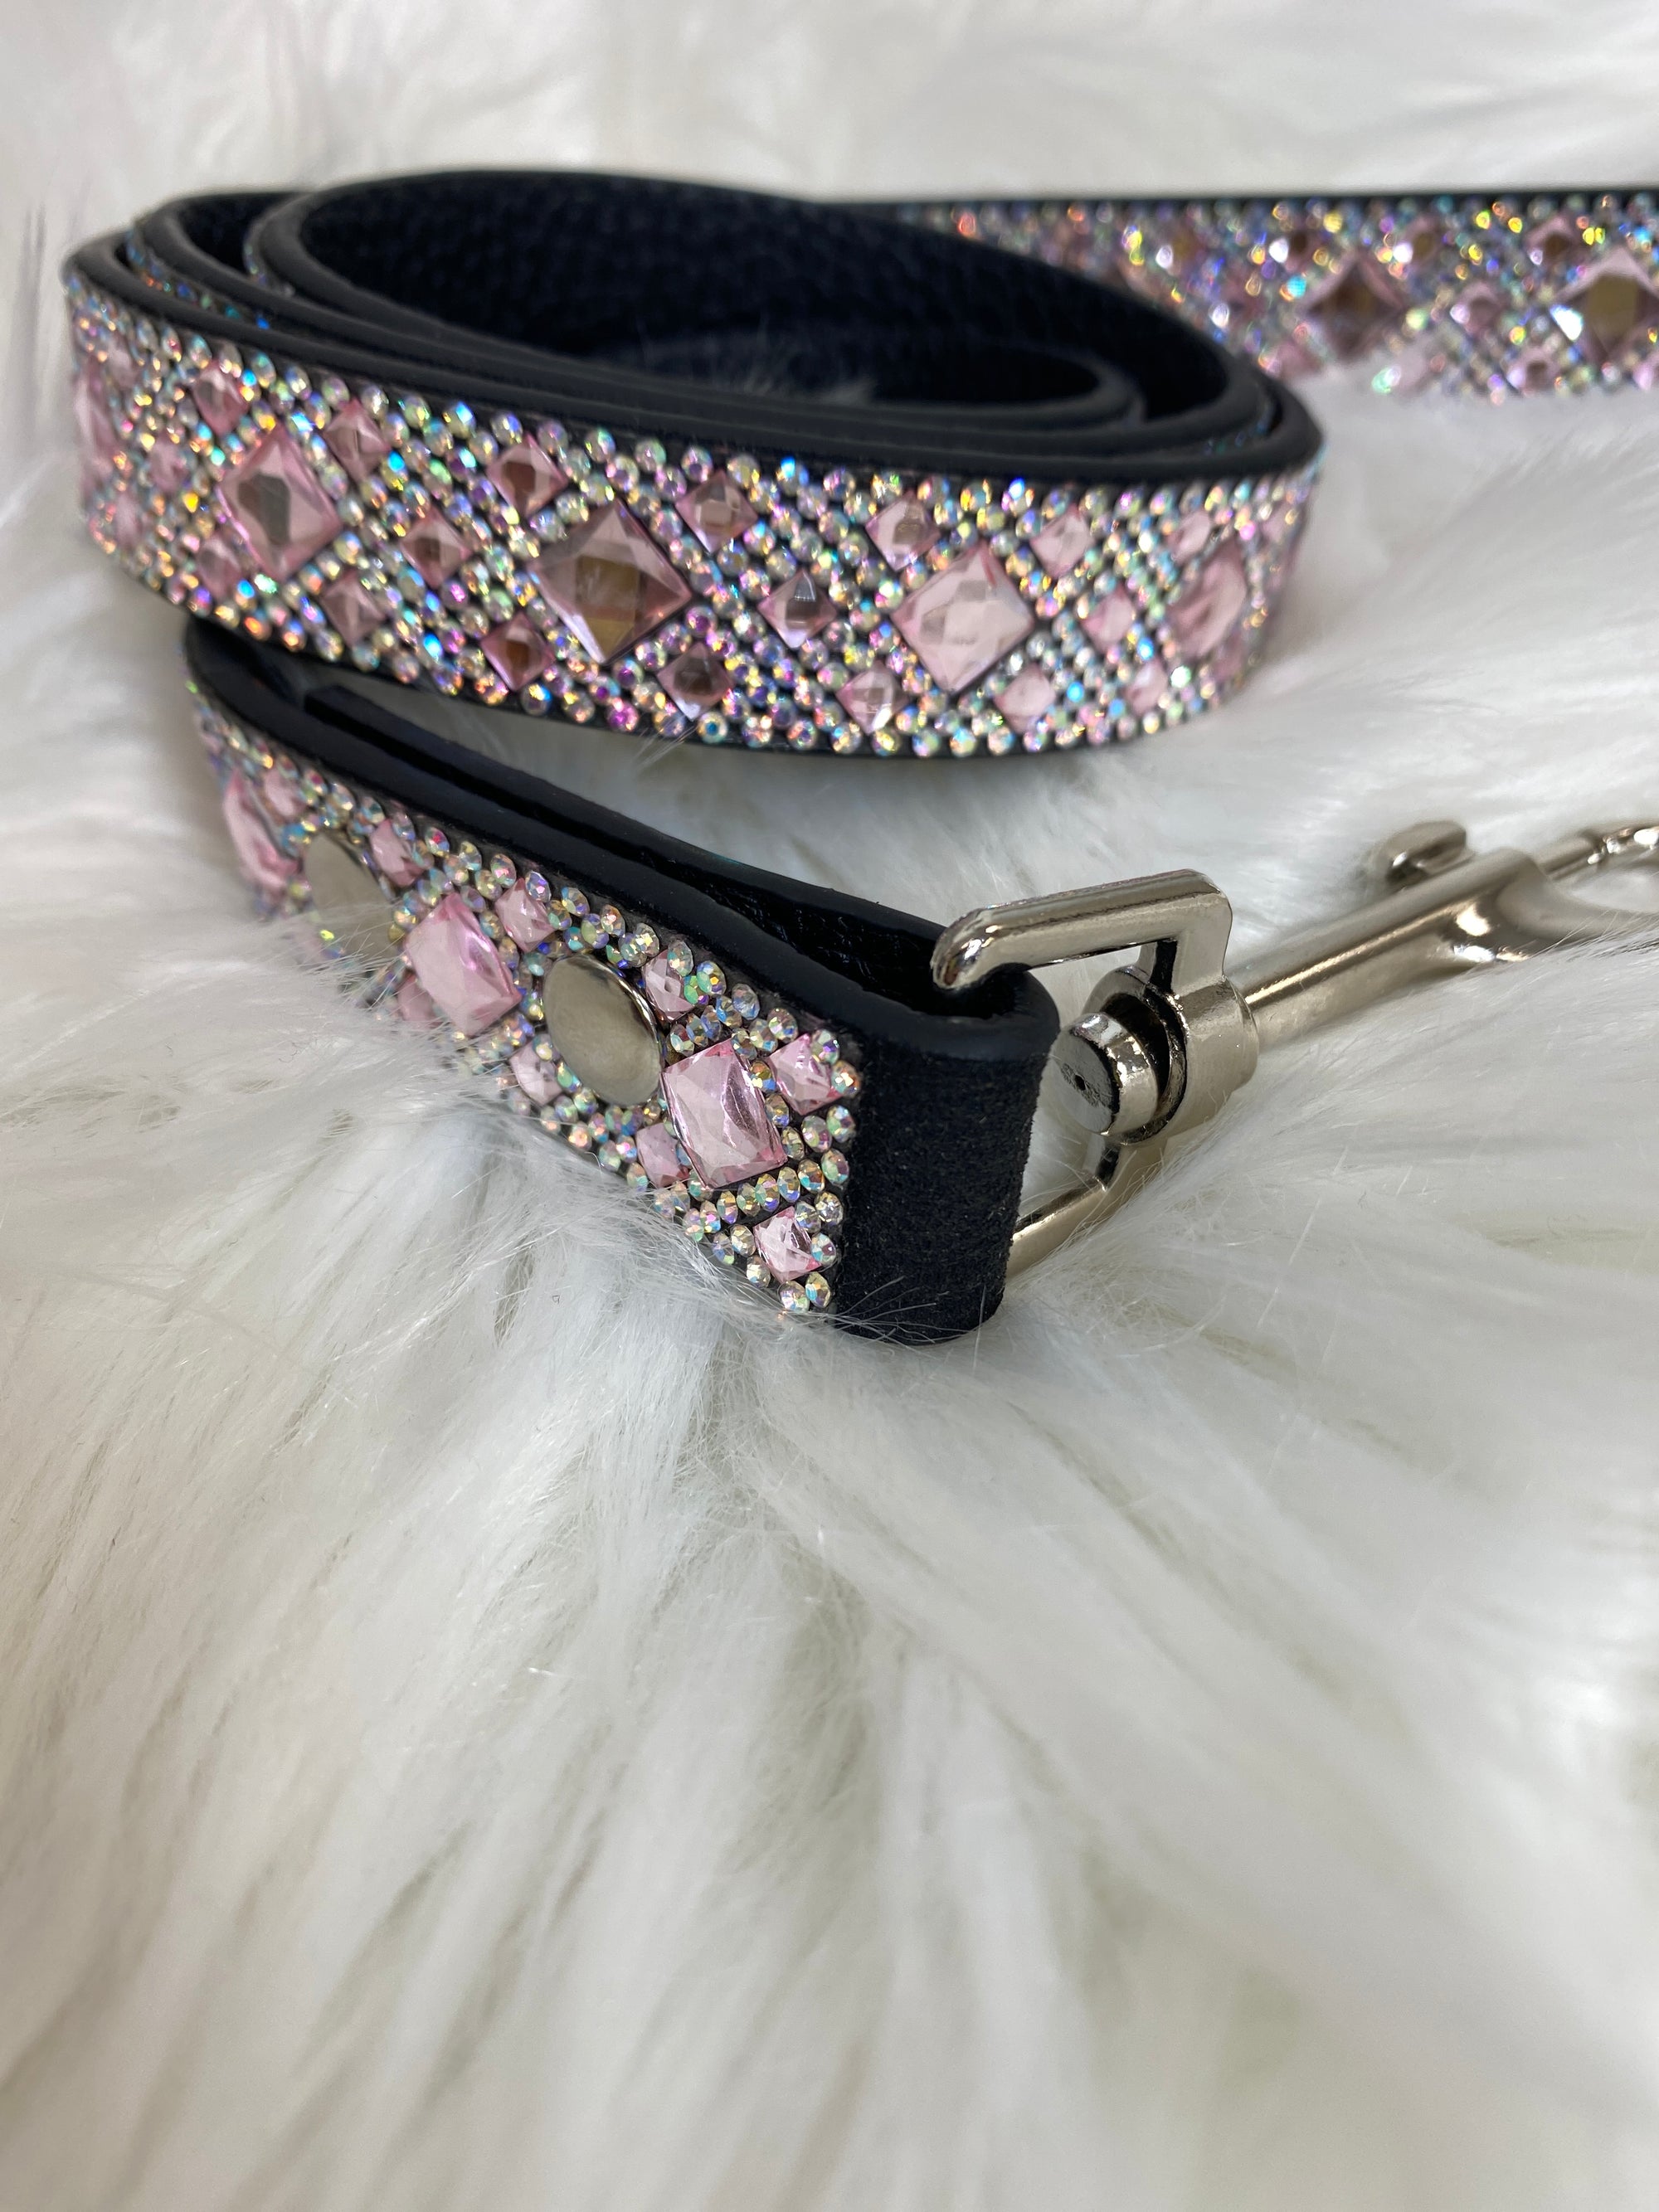 Diamonds in the Ruff Pet Leashes - Style Choice